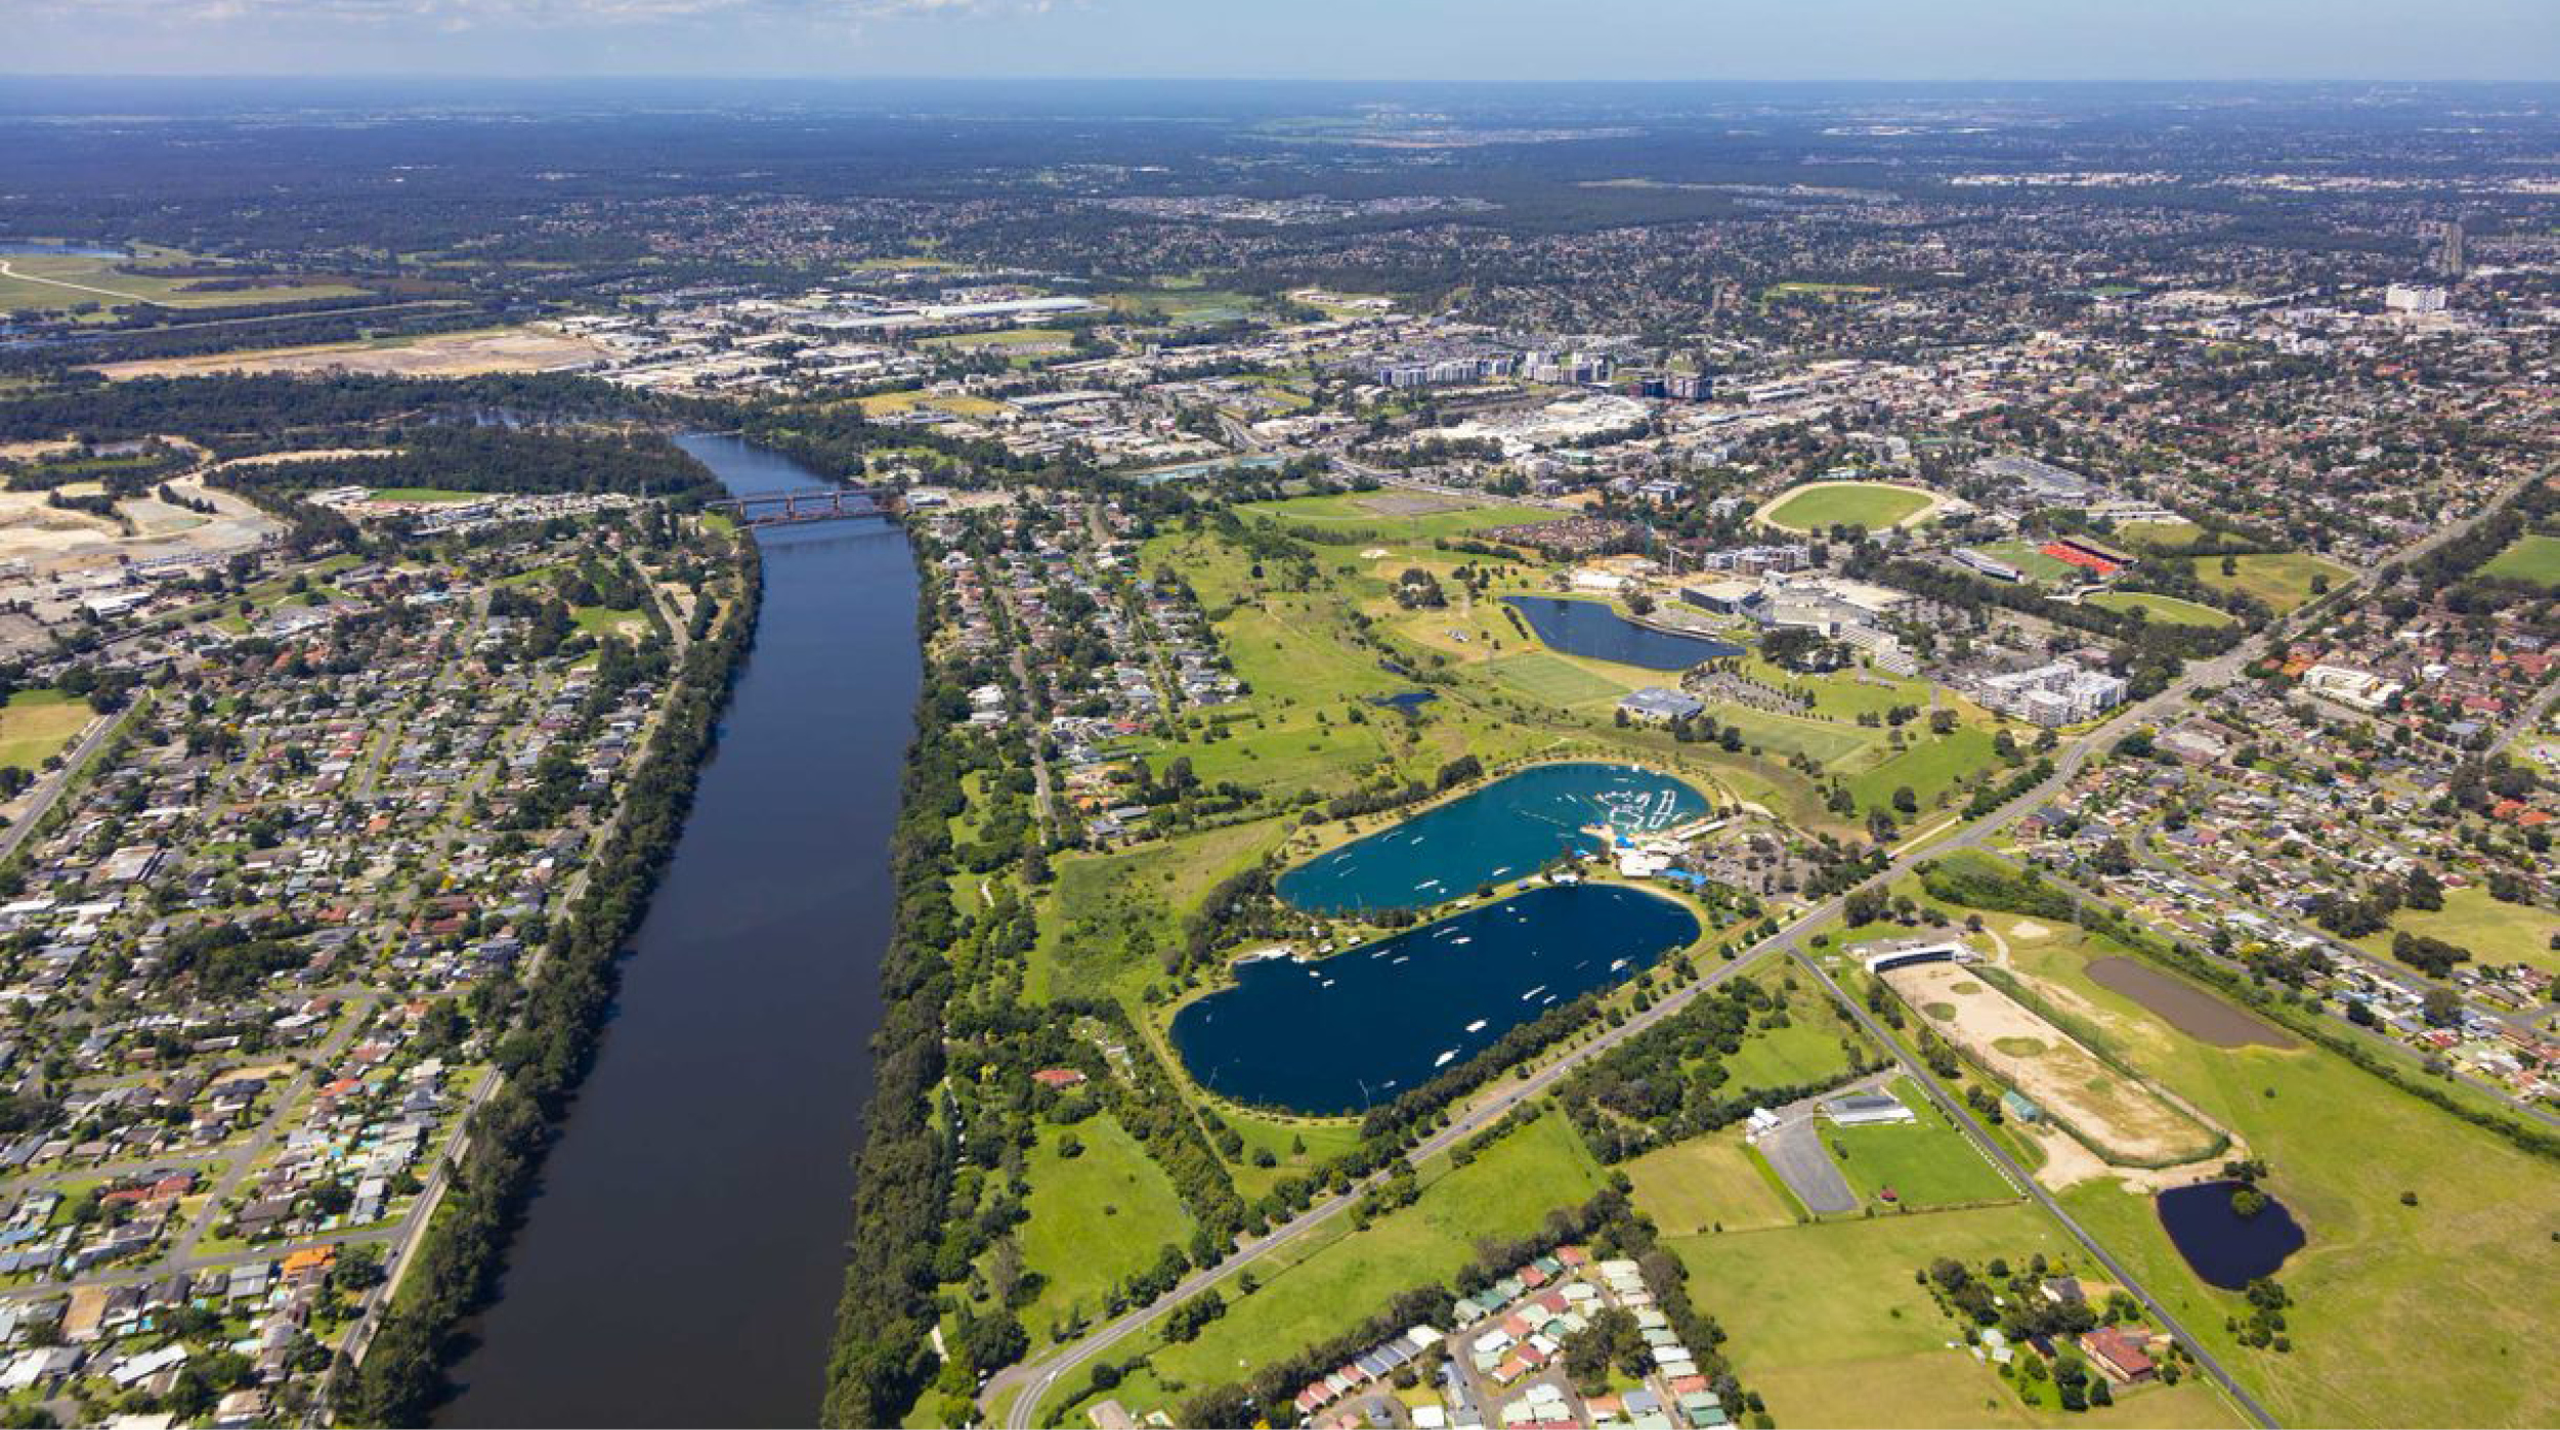 An aerial view of Penrith